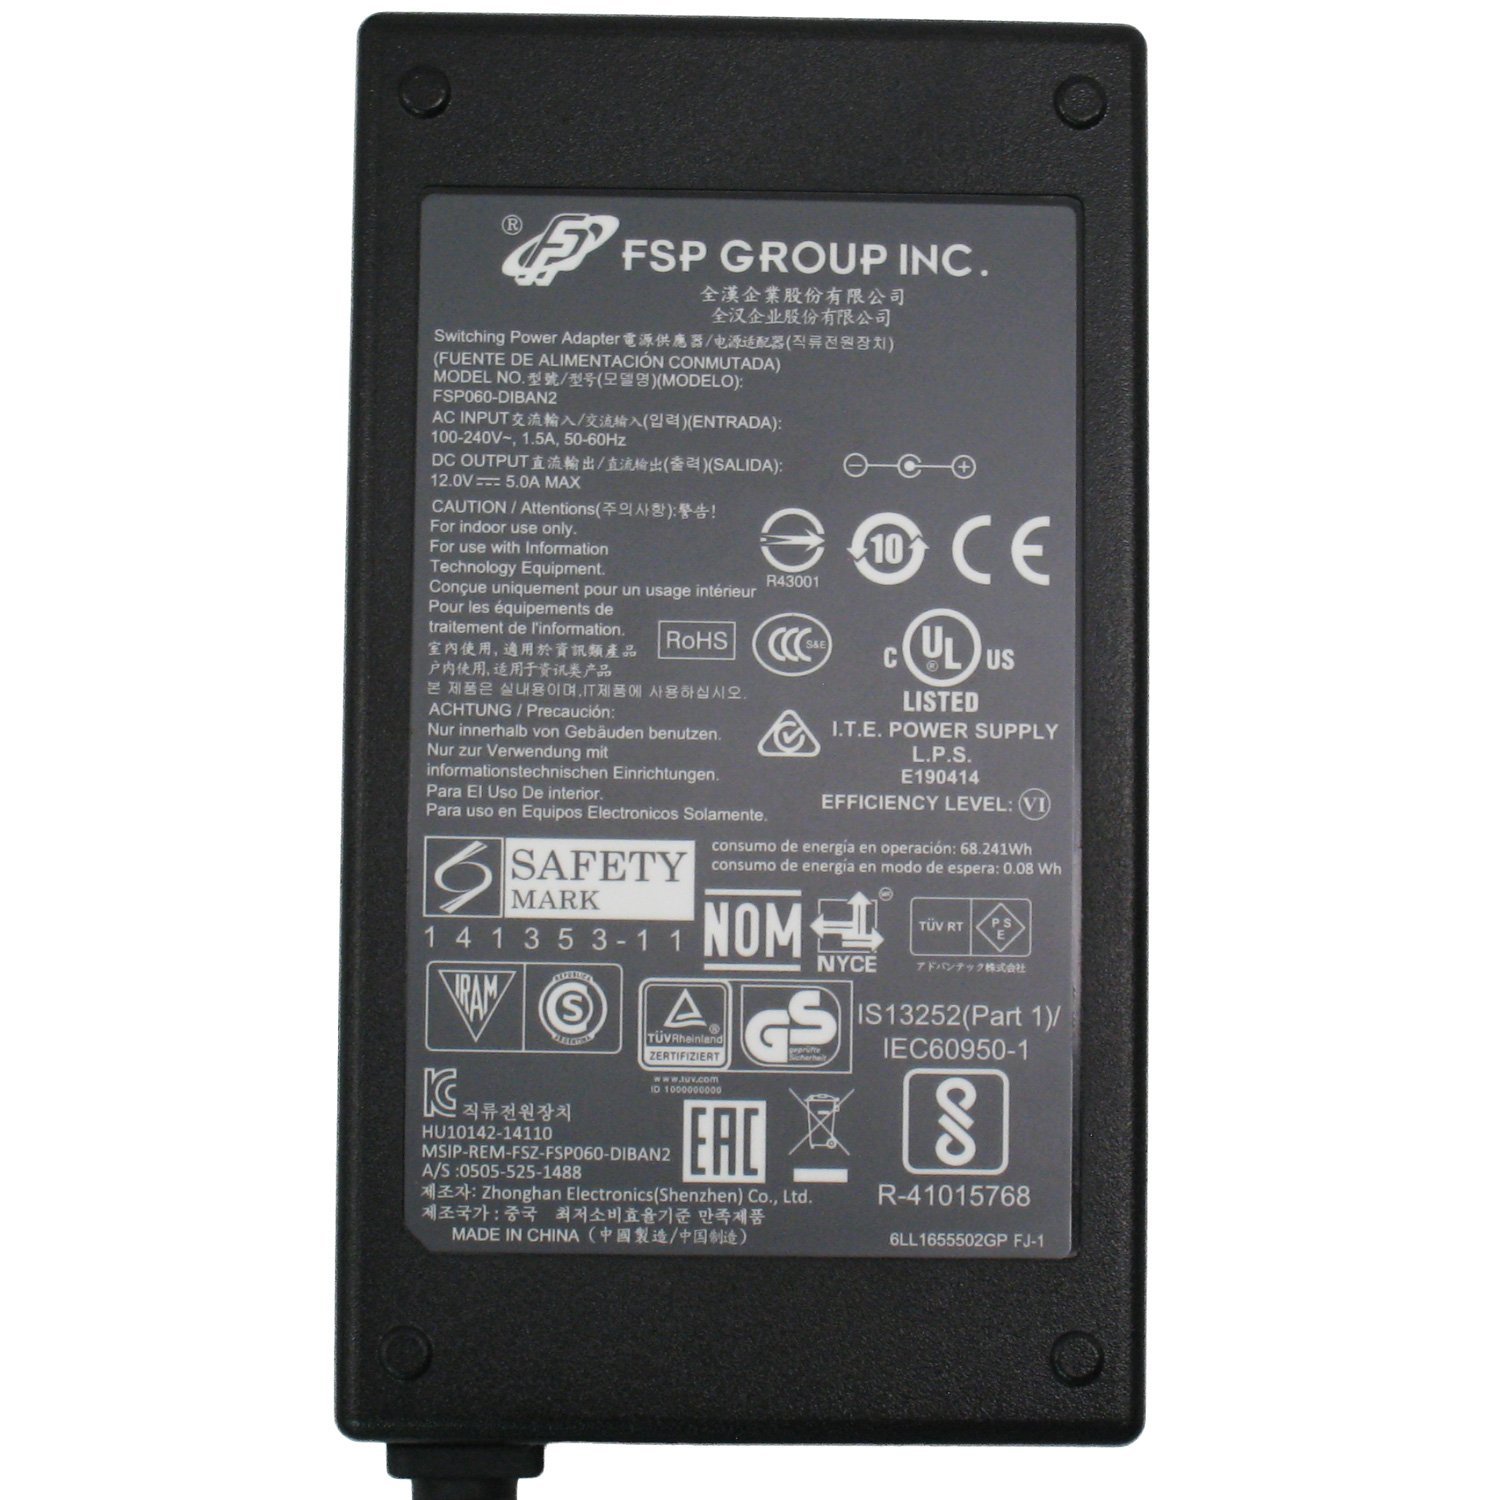 FSP Group 60W 12V 5A Power Adapter Replacement for FSP060-DBAE1 (FSP060-DIBAN2)